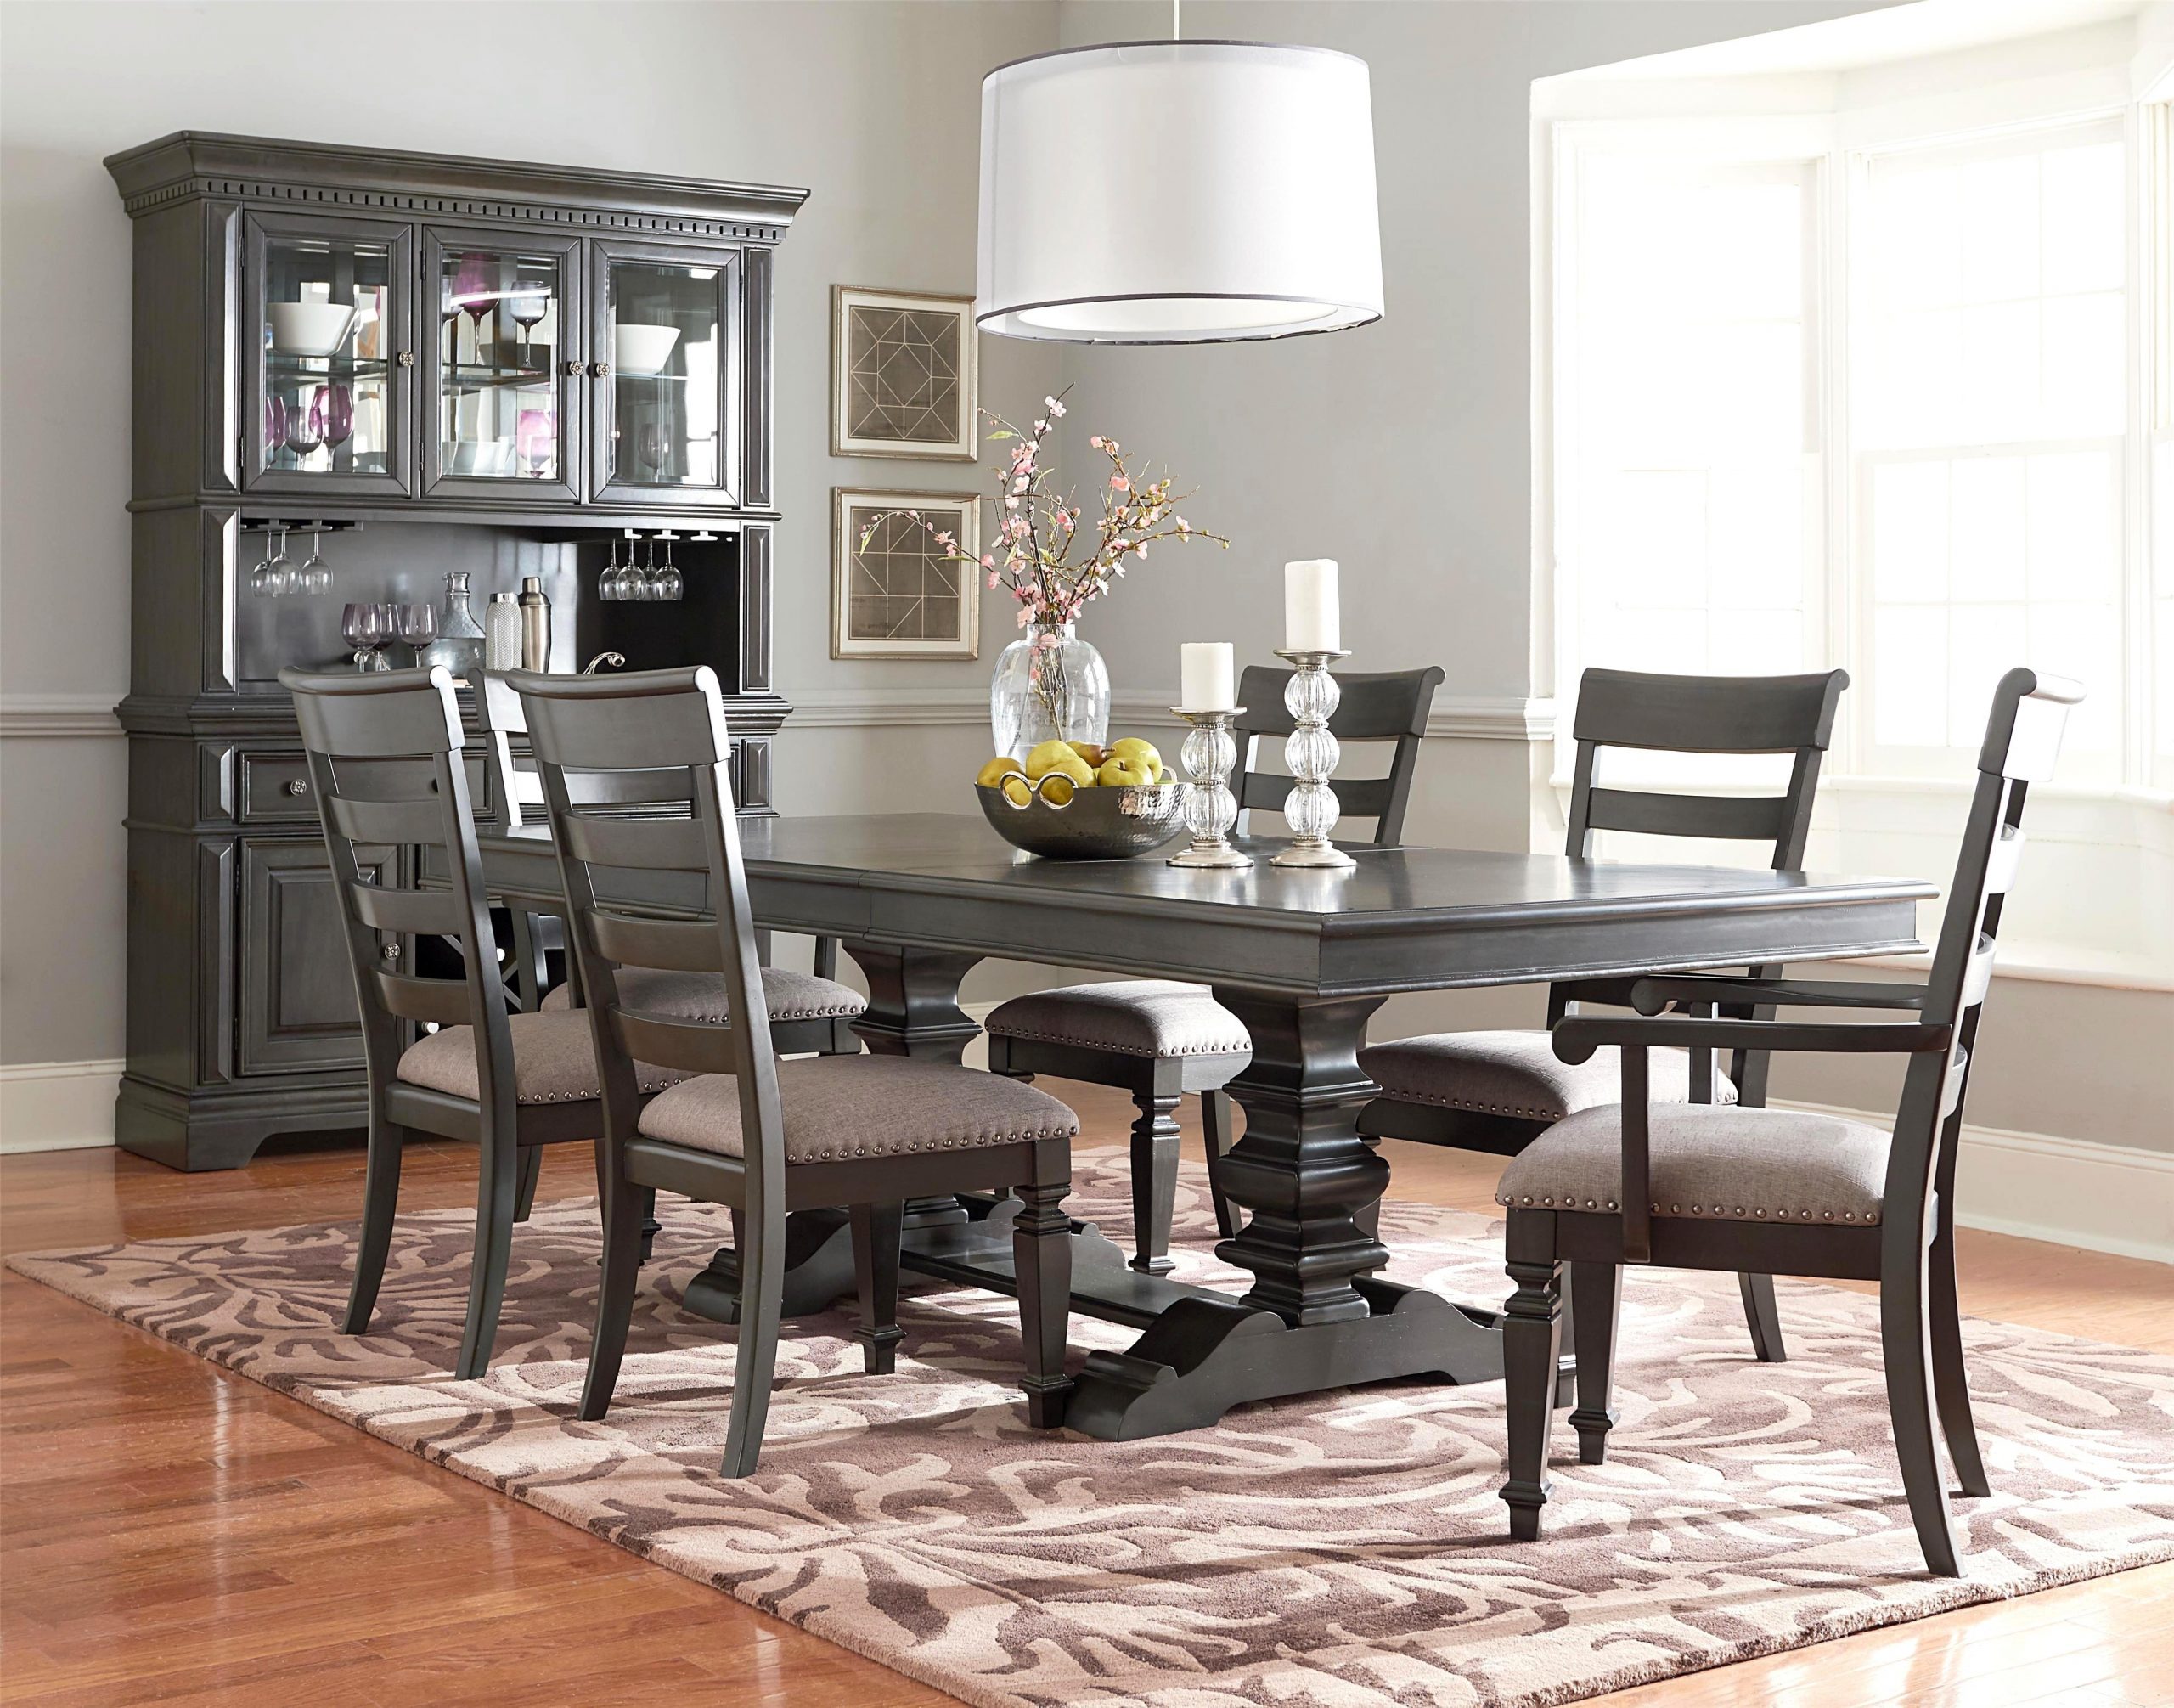 Dining Room Table Chairs And Hutch • Faucet Ideas Site